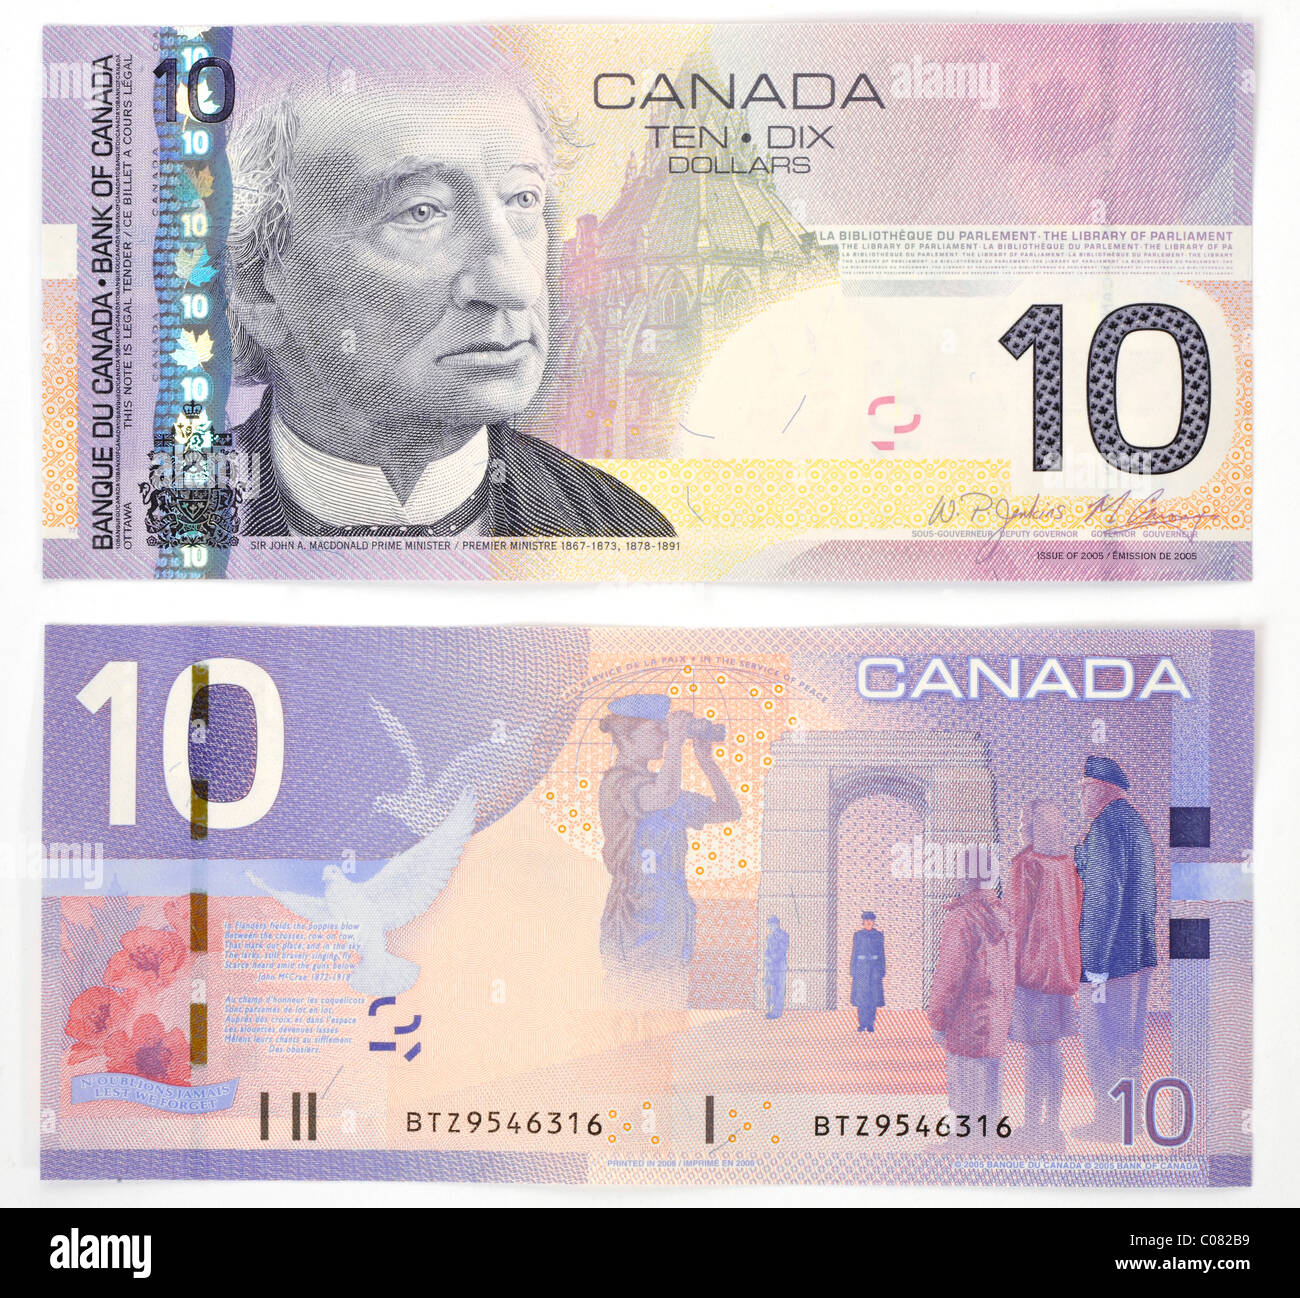 Canadian 10 dollar banknote, front and back Stock Photo